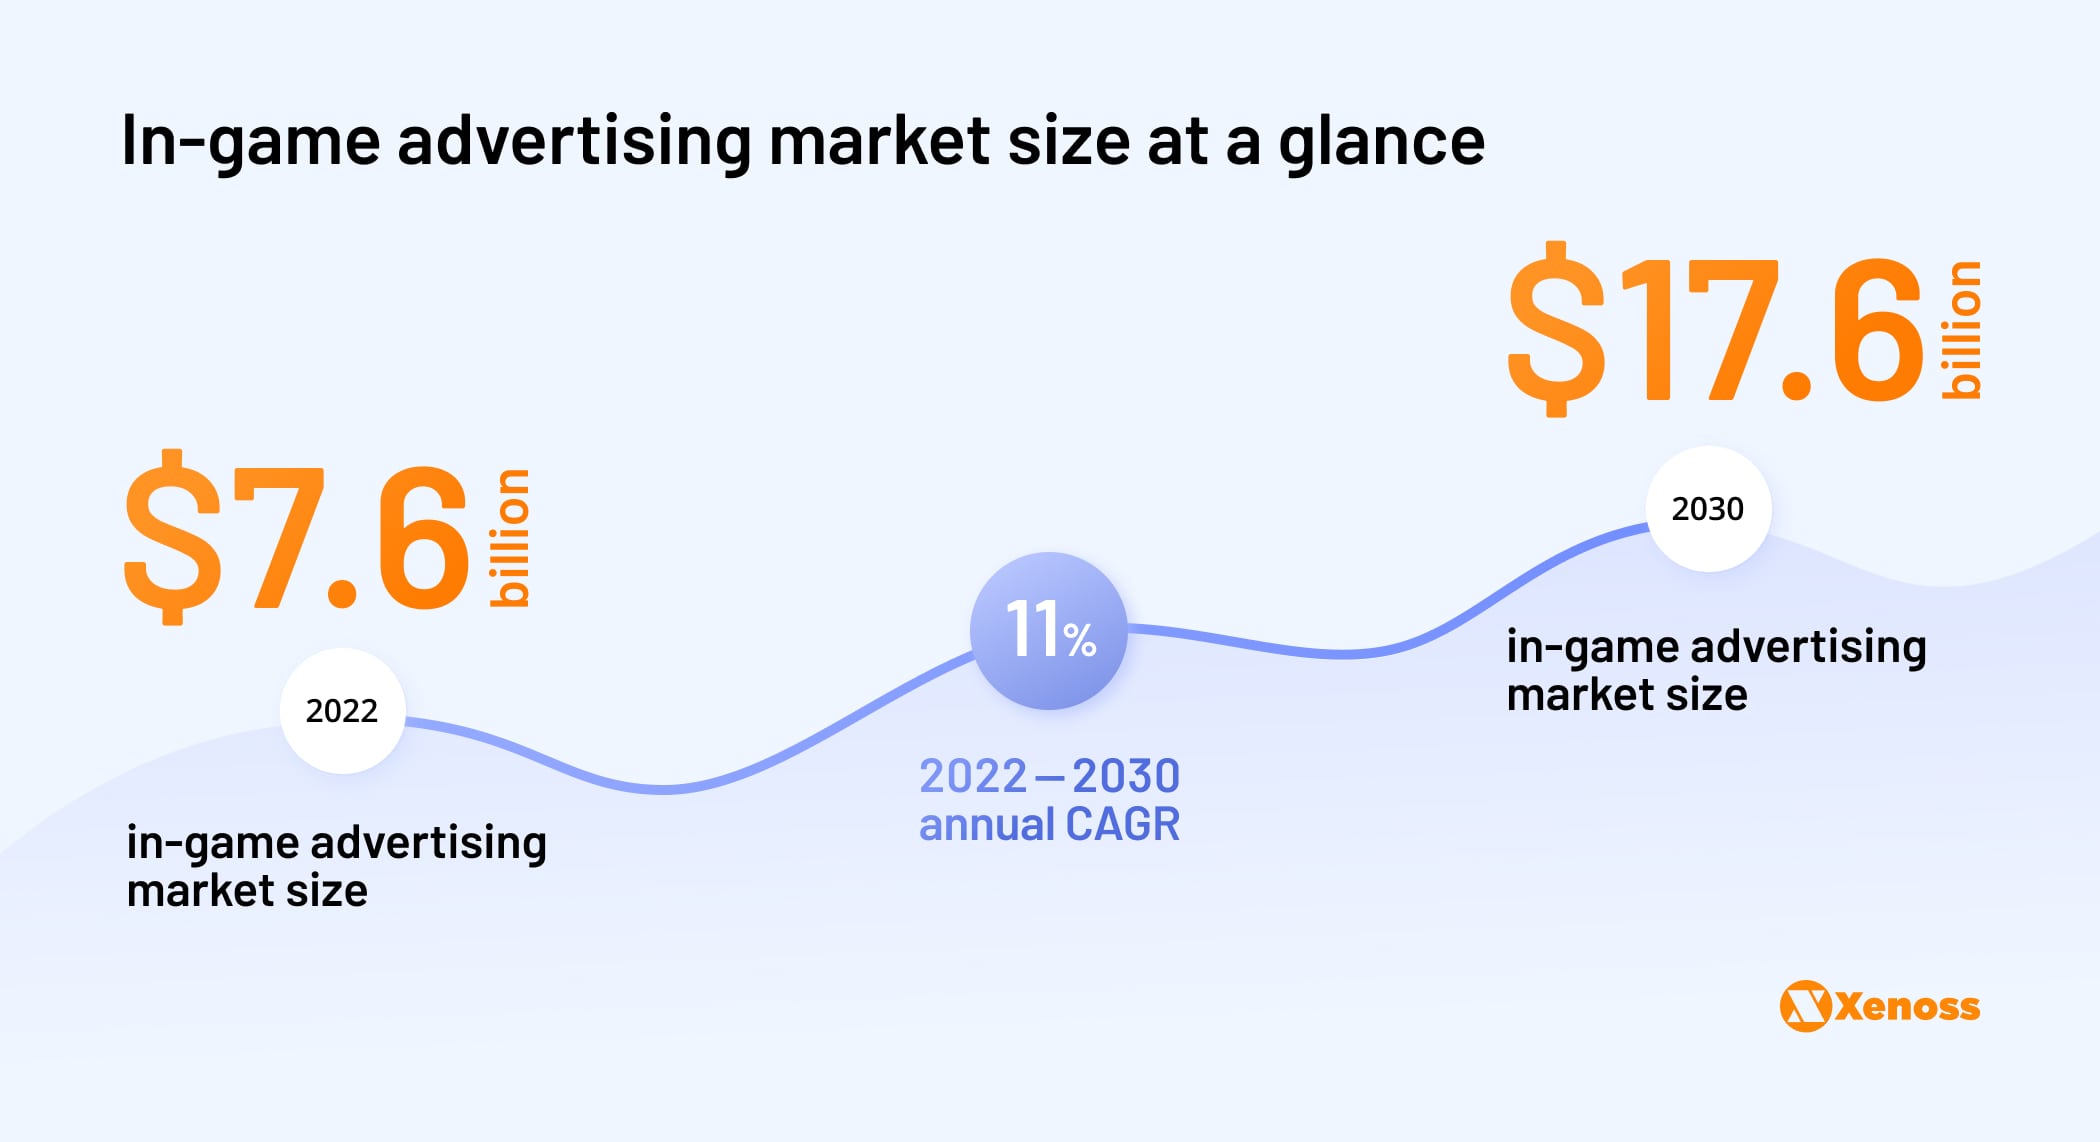 In-game advertising market size at a glance - Xenoss blog - In-Game Advertising